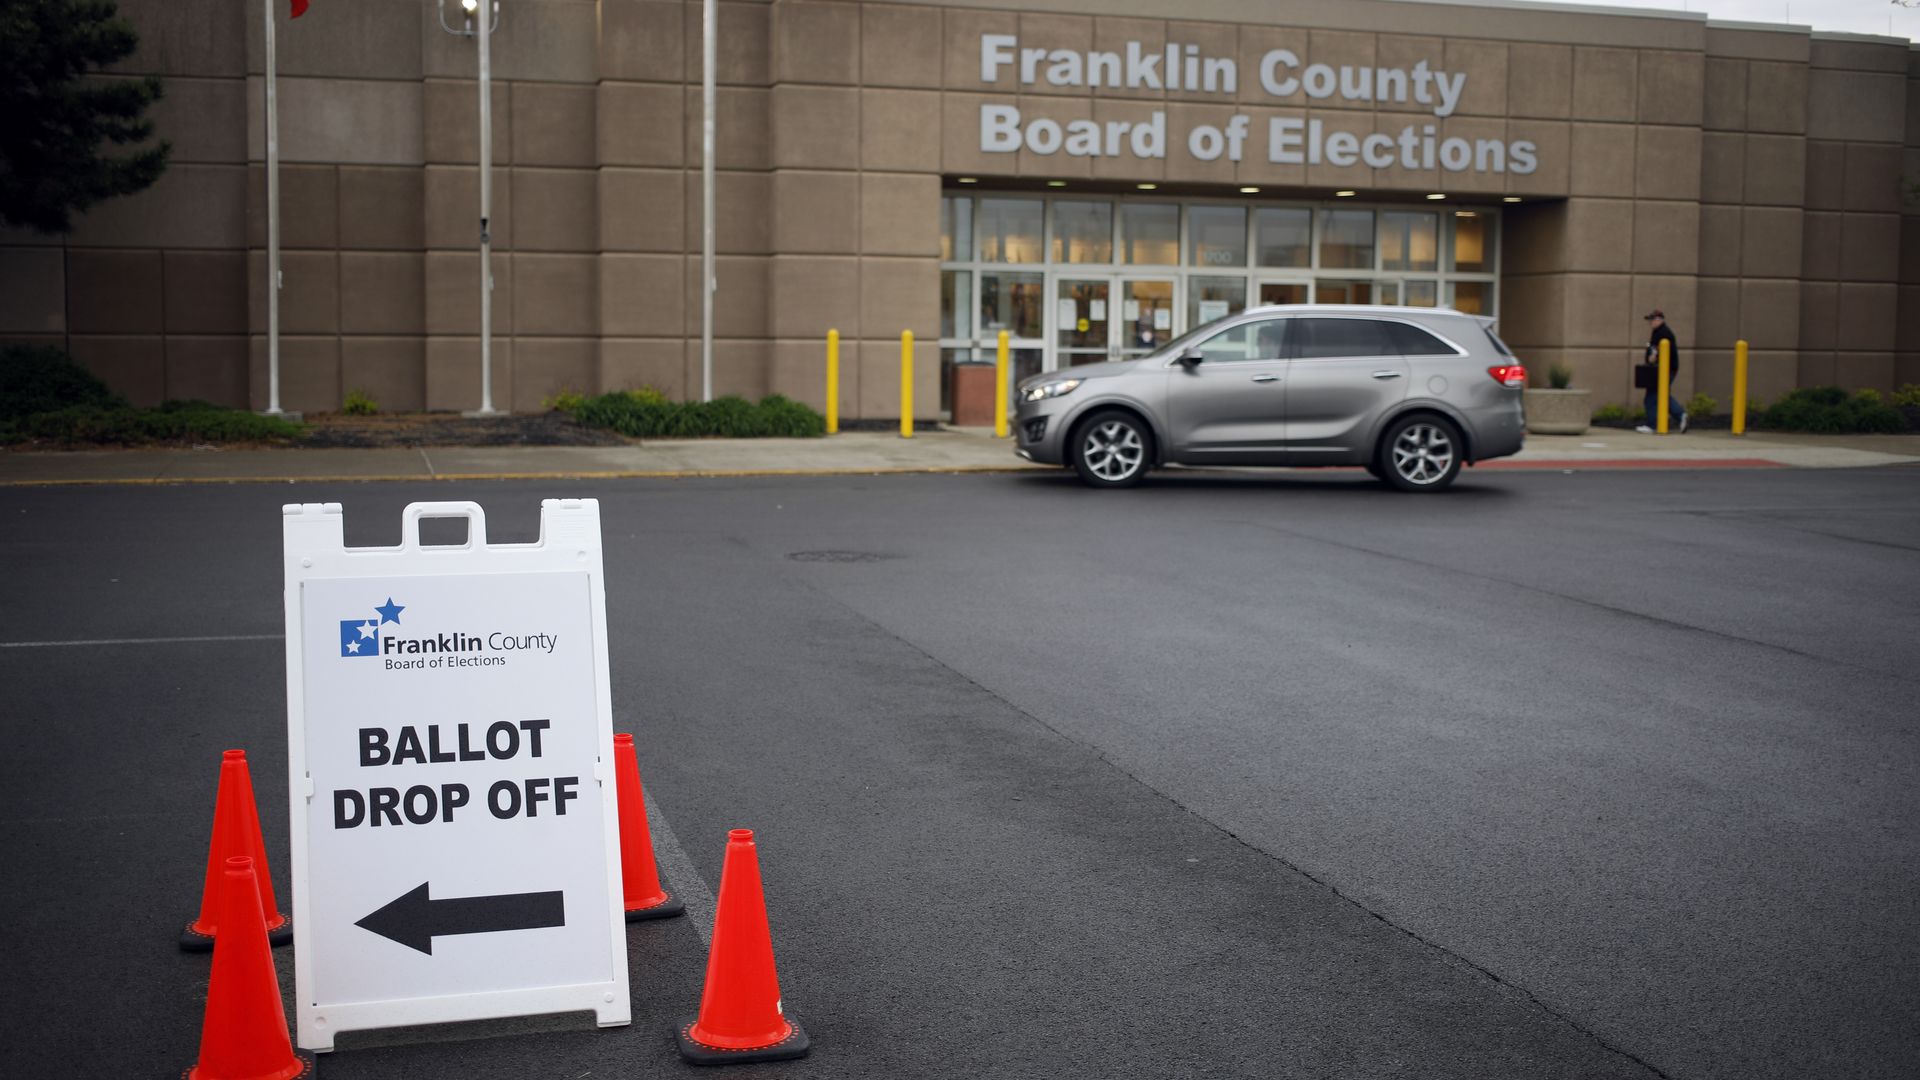 The front entrance of the Franklin County Board of Elections with a side in front reading "Ballot Drop Off."